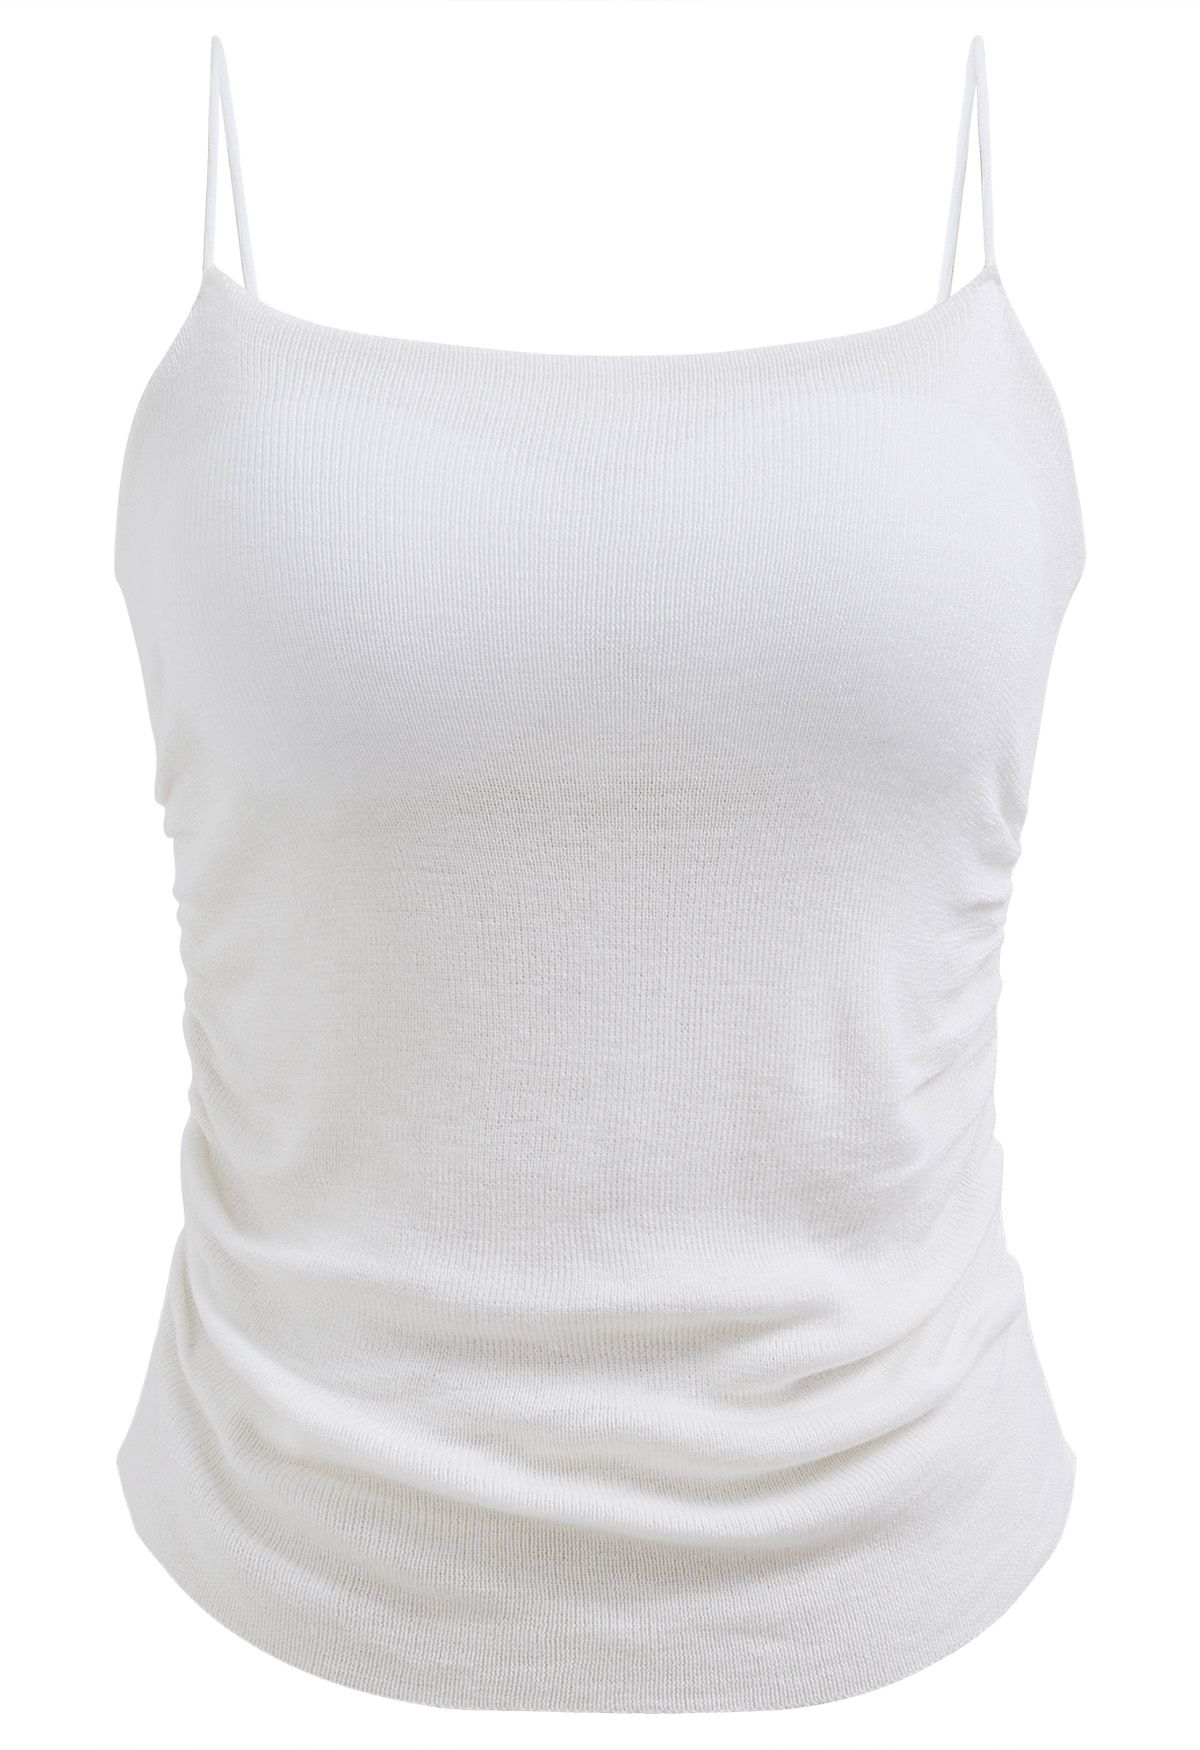 Fashion (e White Black)knitted Camis For Woman Tops For Women